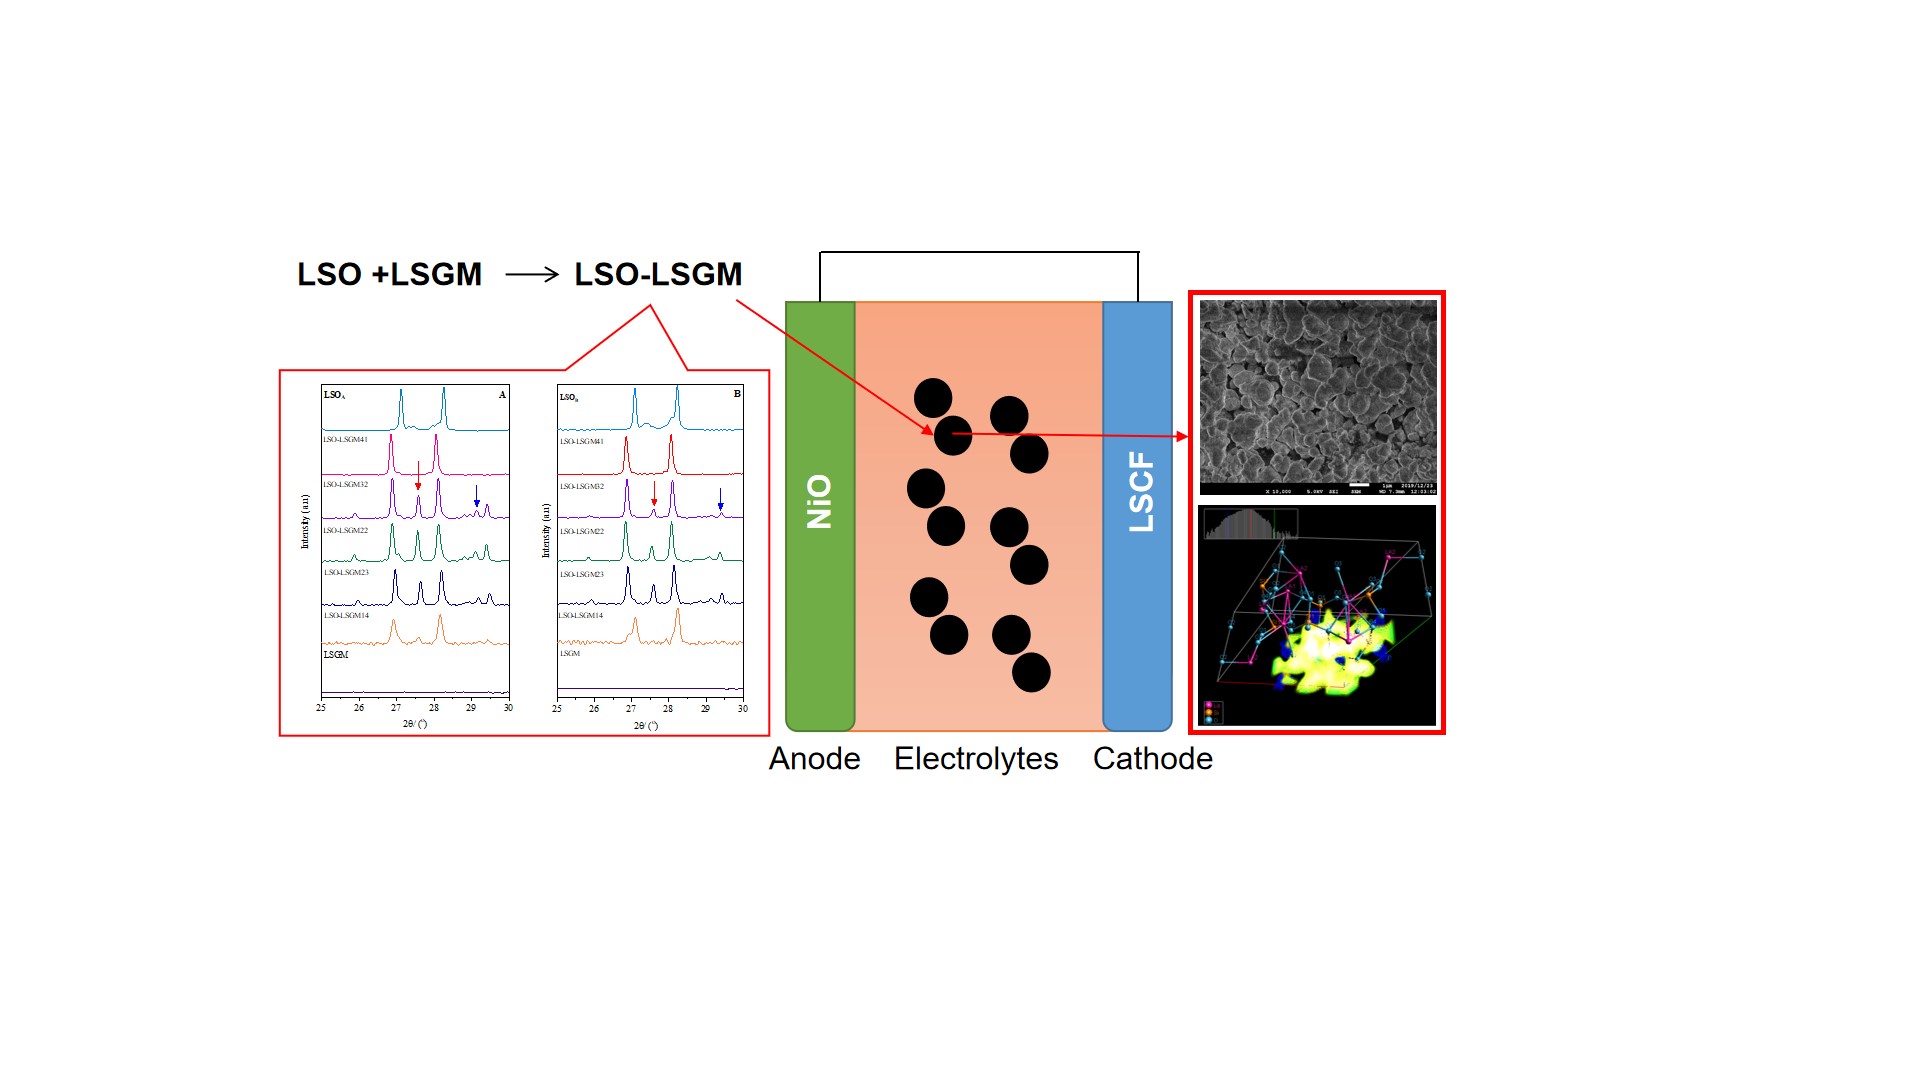 A Novel Lanthanum-based Solid Oxide Fuel Cell Electrolyte Composite with Enhanced Thermochemical Stability toward Perovskite Cathode